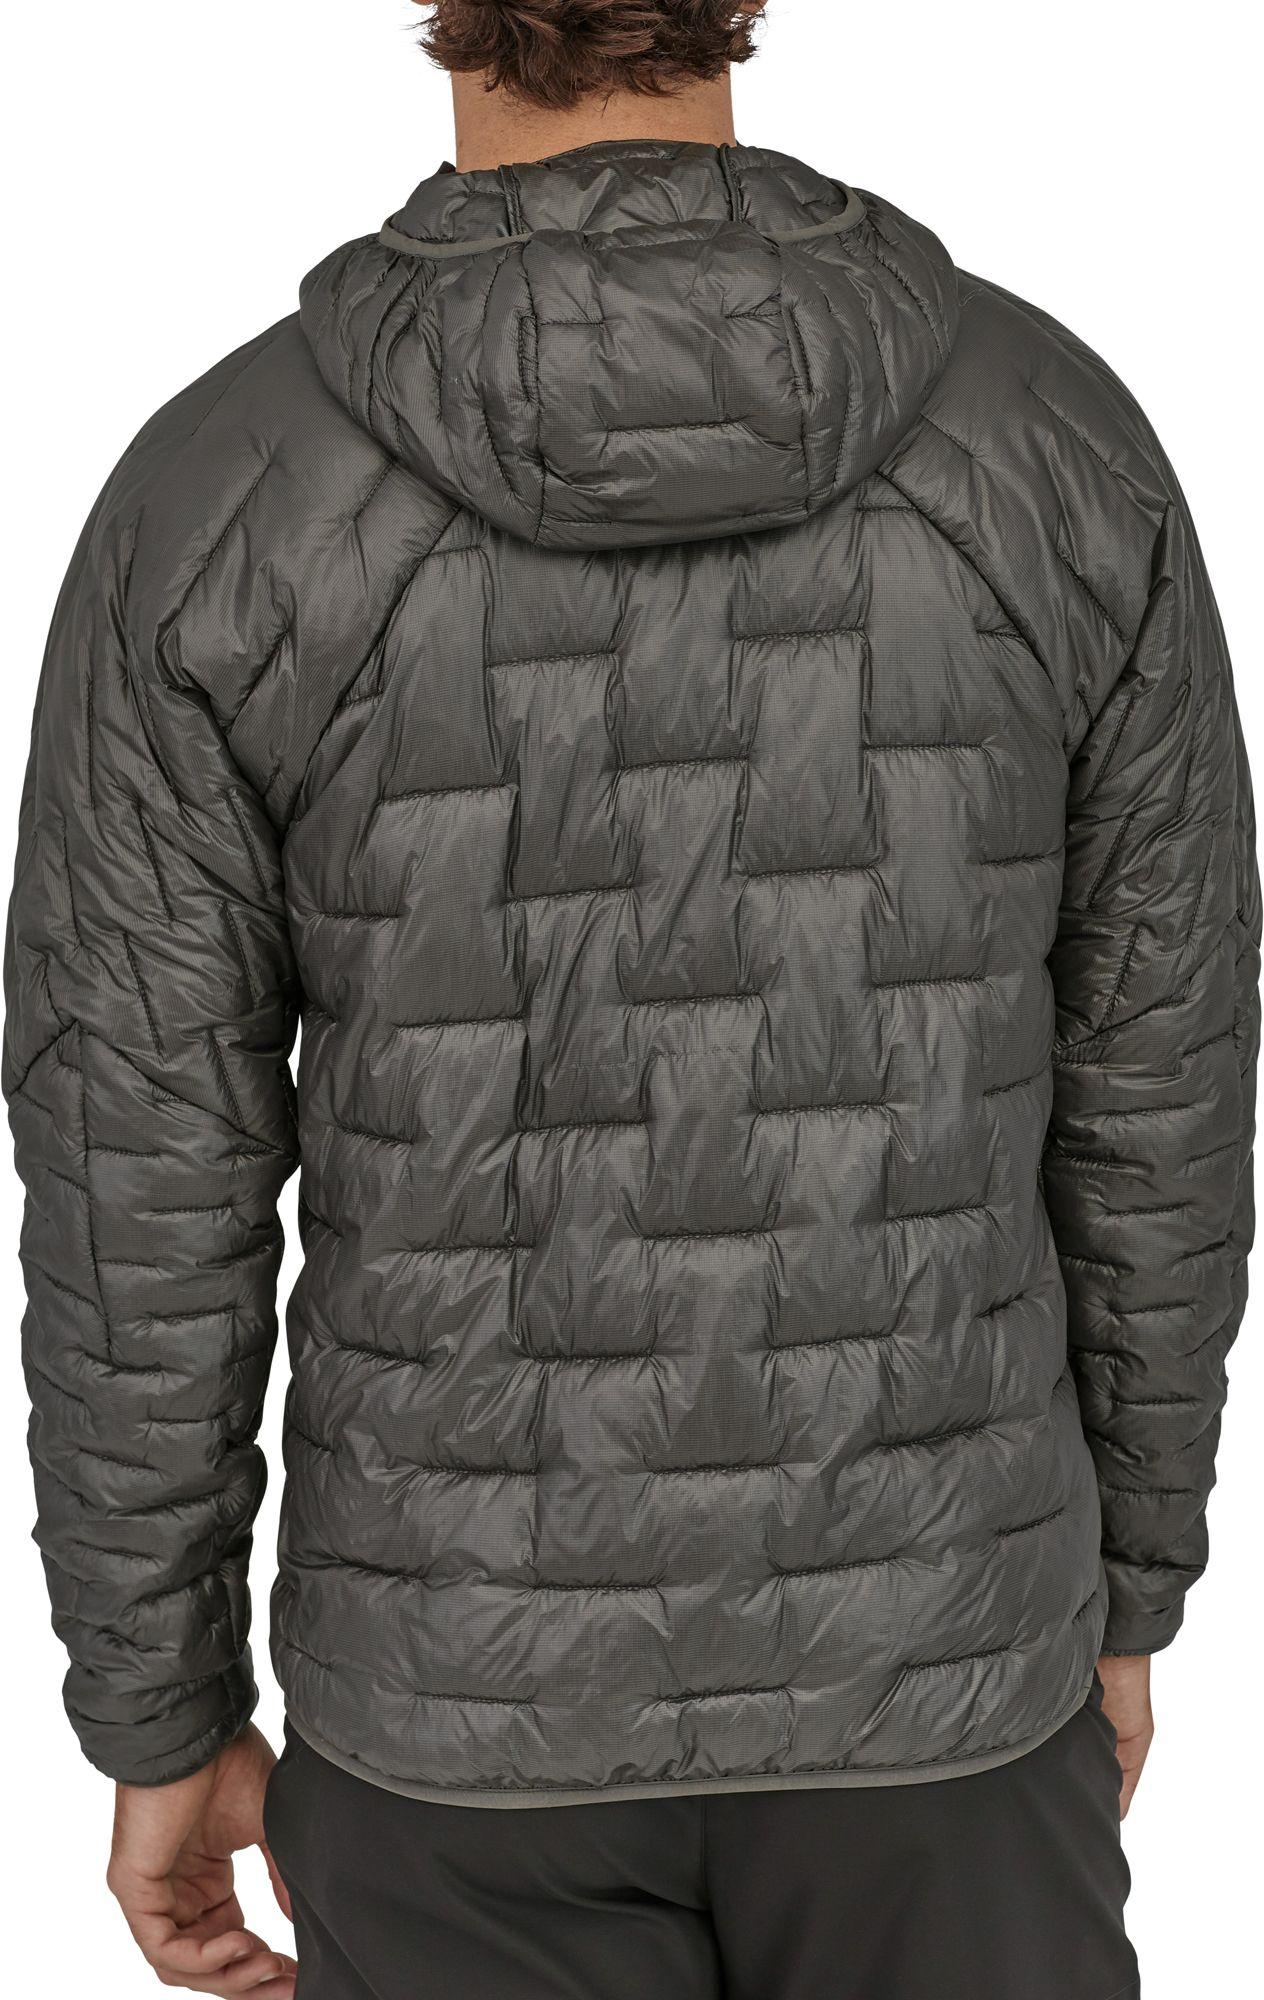 Patagonia Synthetic Micro Puff Insulated Jacket in Gray for Men - Lyst